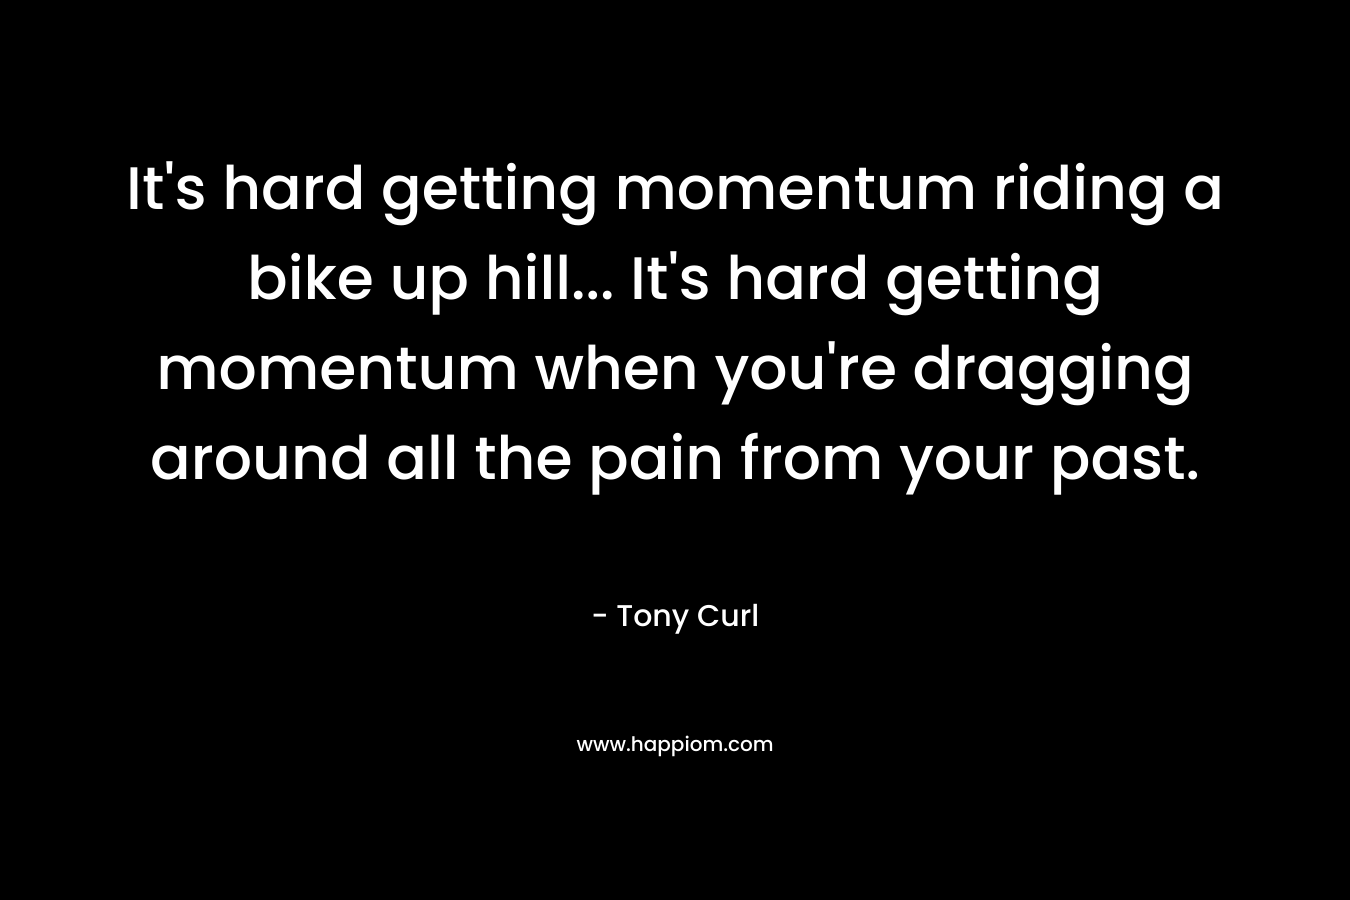 It's hard getting momentum riding a bike up hill... It's hard getting momentum when you're dragging around all the pain from your past.